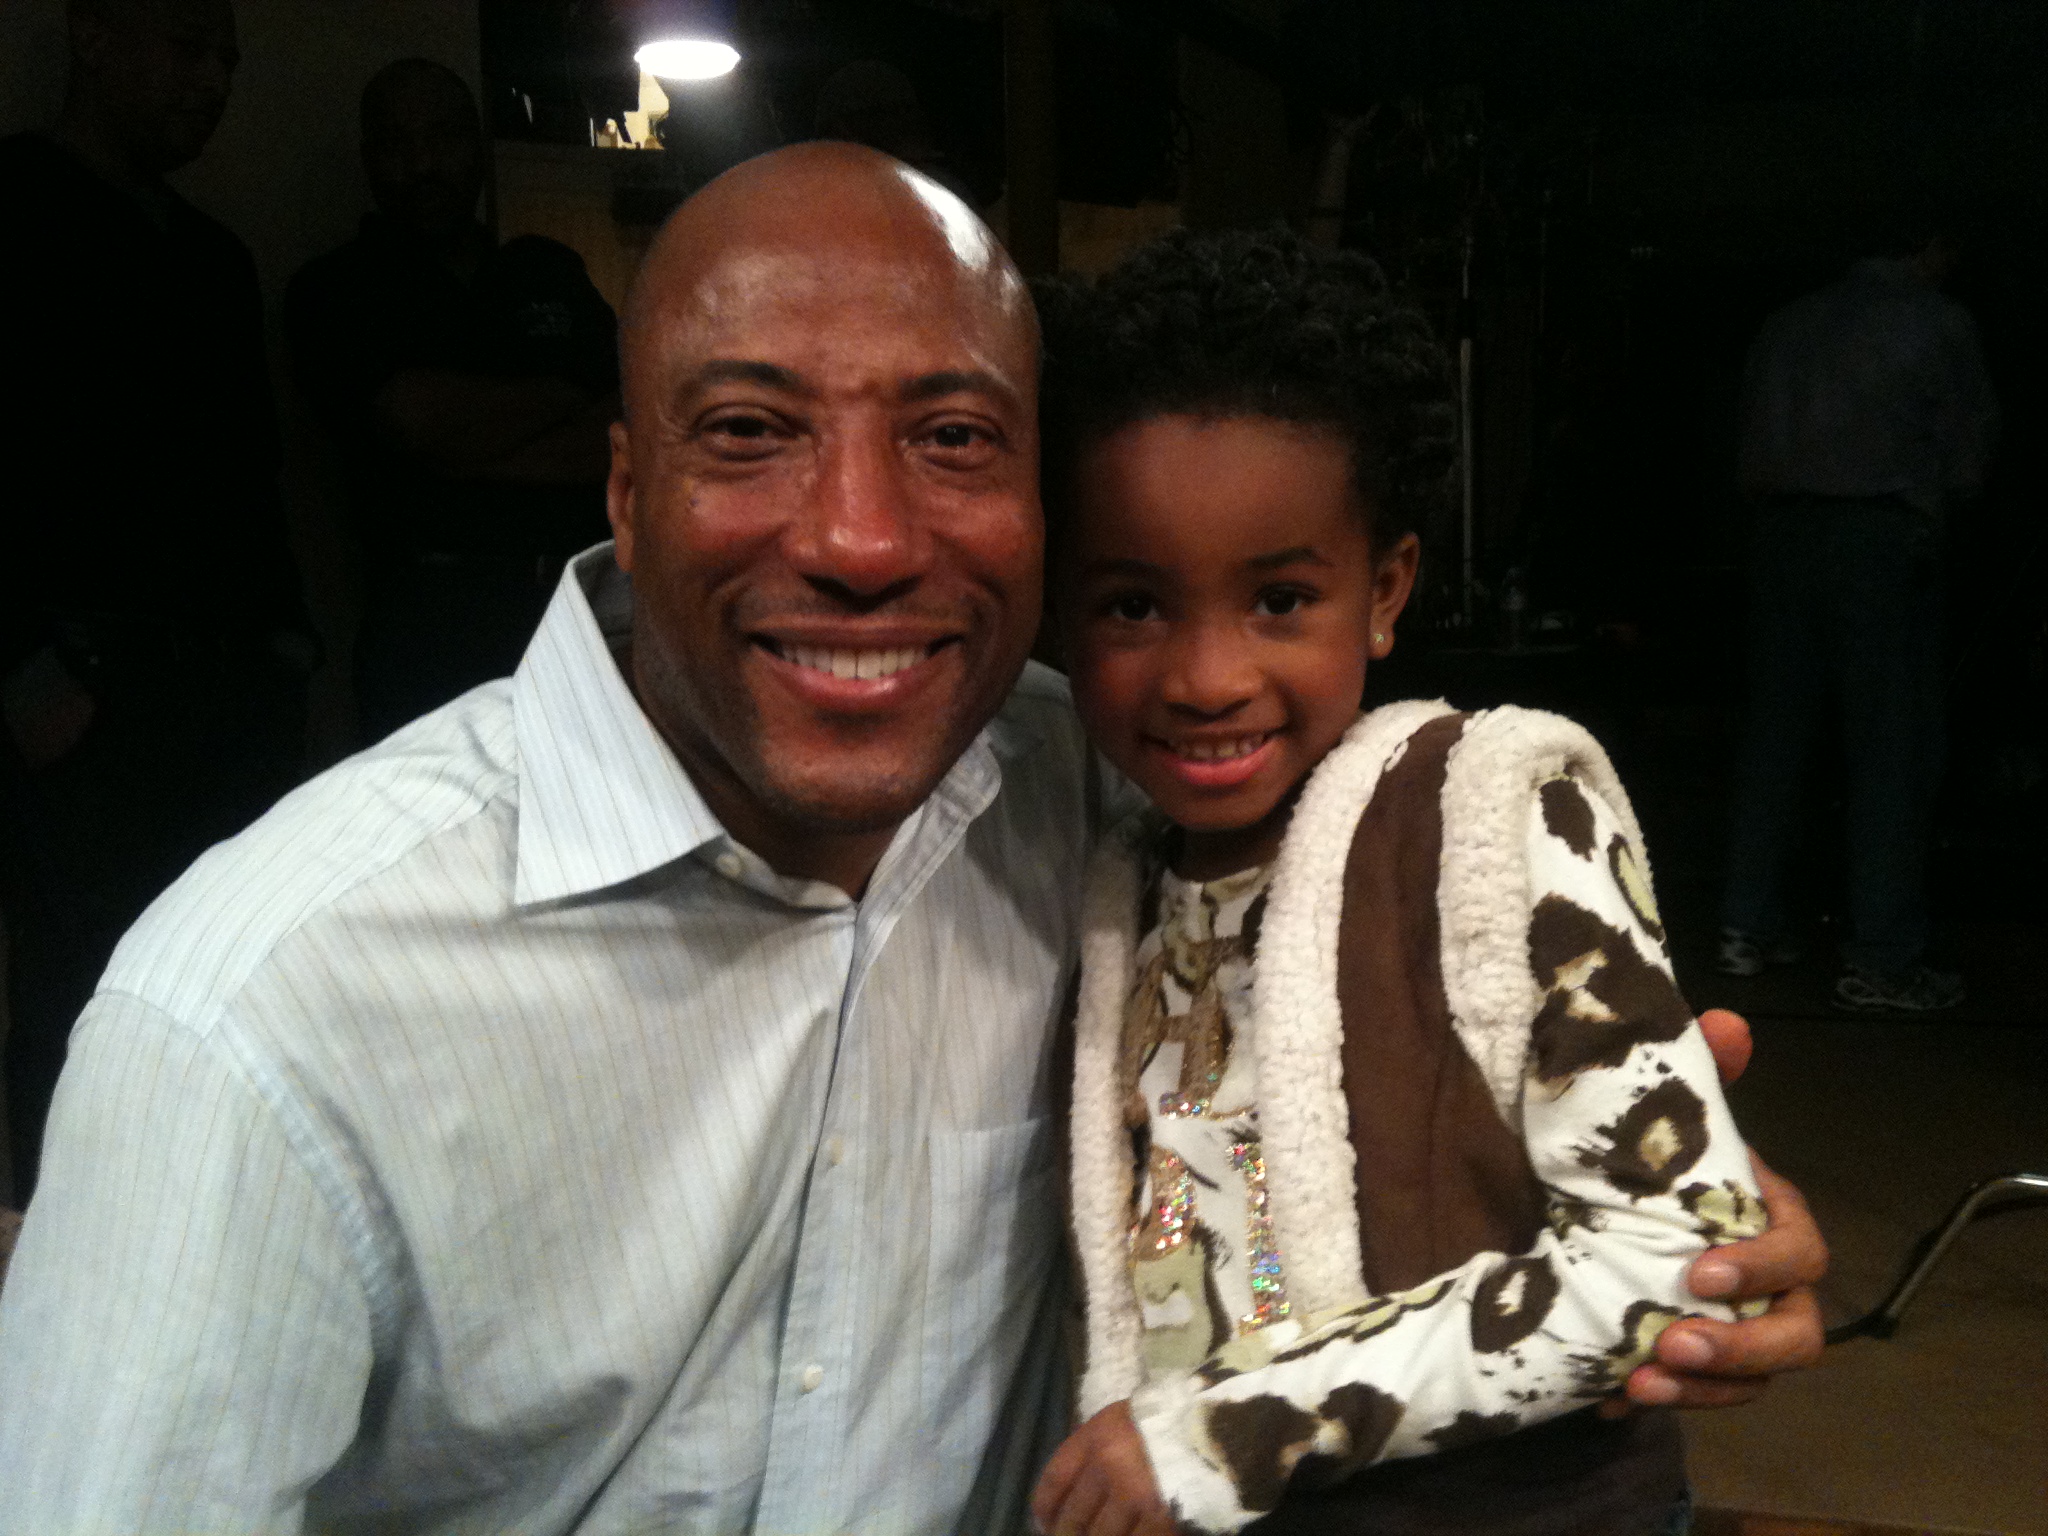 Layla With Producer Byron Allen